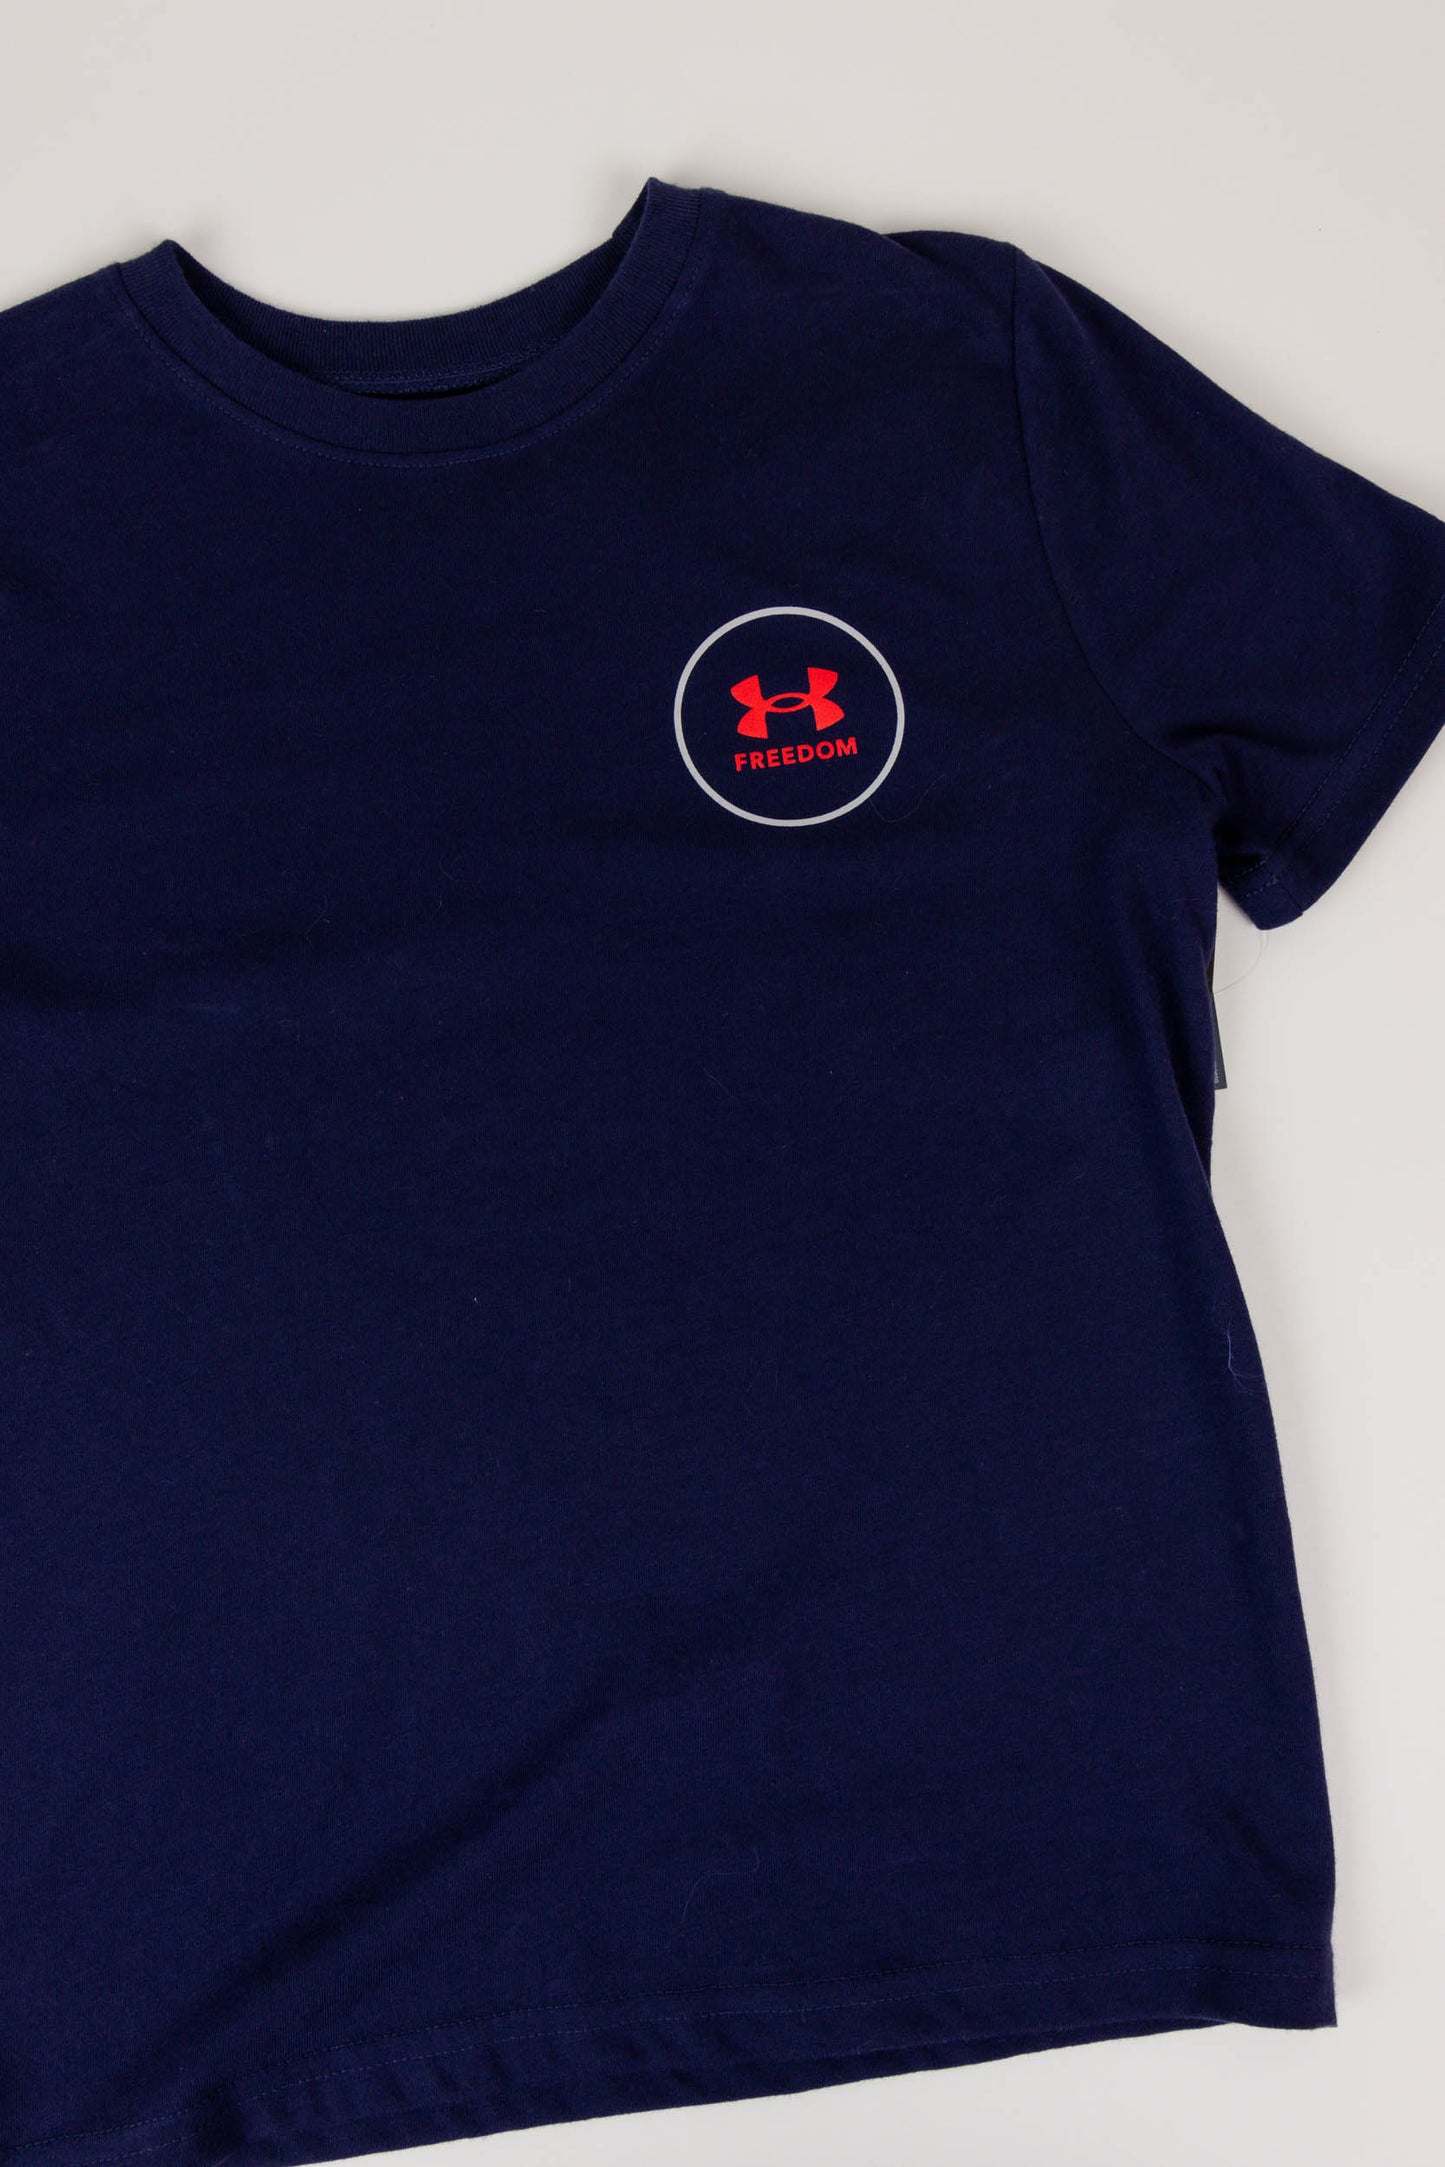 Under Armour – The Vault Clothing Co.